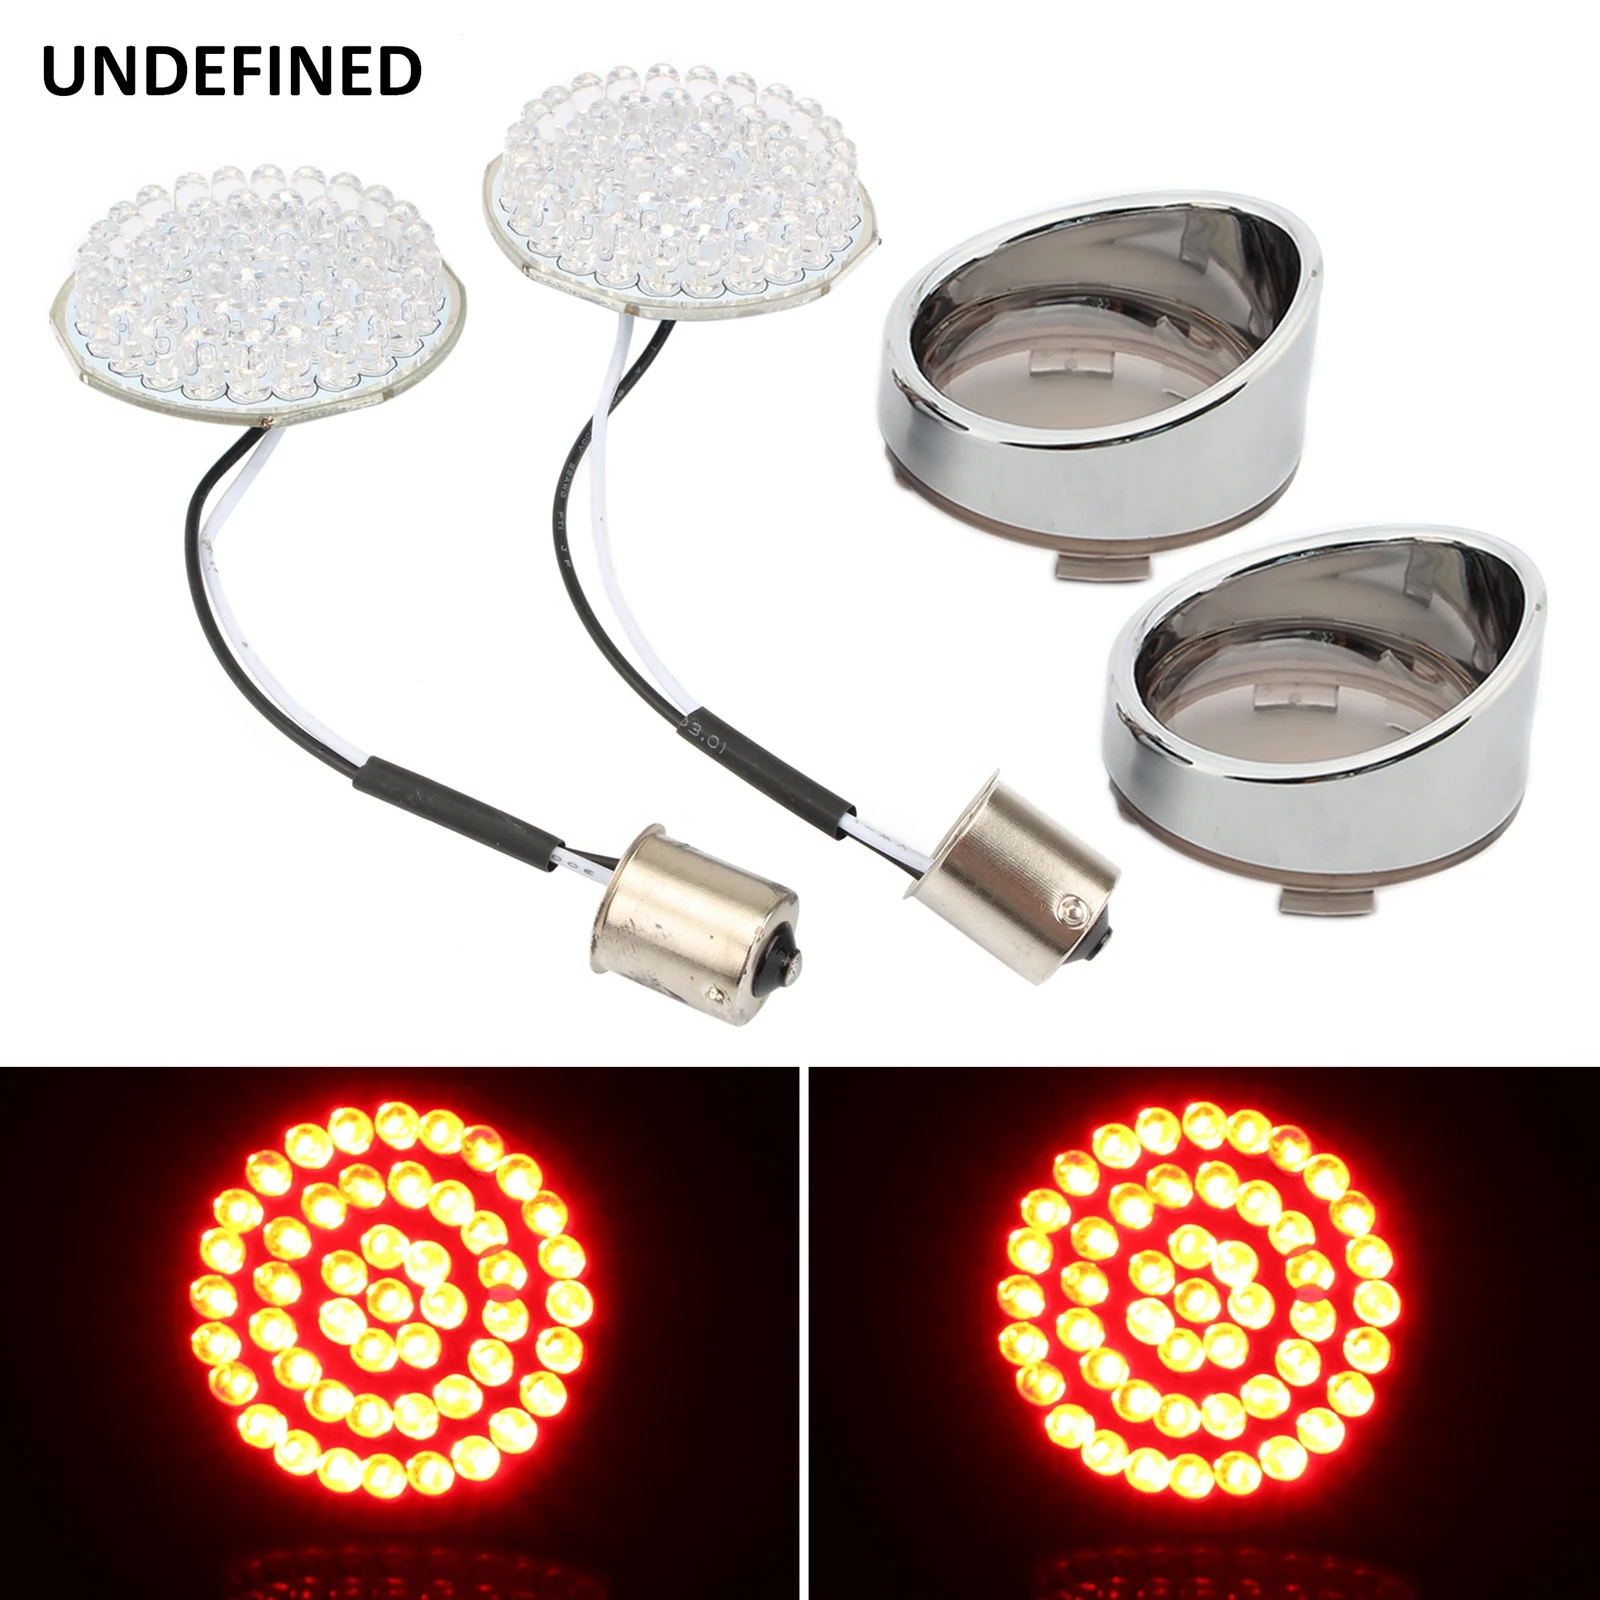 

Motorcycle Turn Signal Indicator Light Bullet Style LED 1156 Inserts Lens Cover For Harley Touring Dyna Softail Sportster XL 883